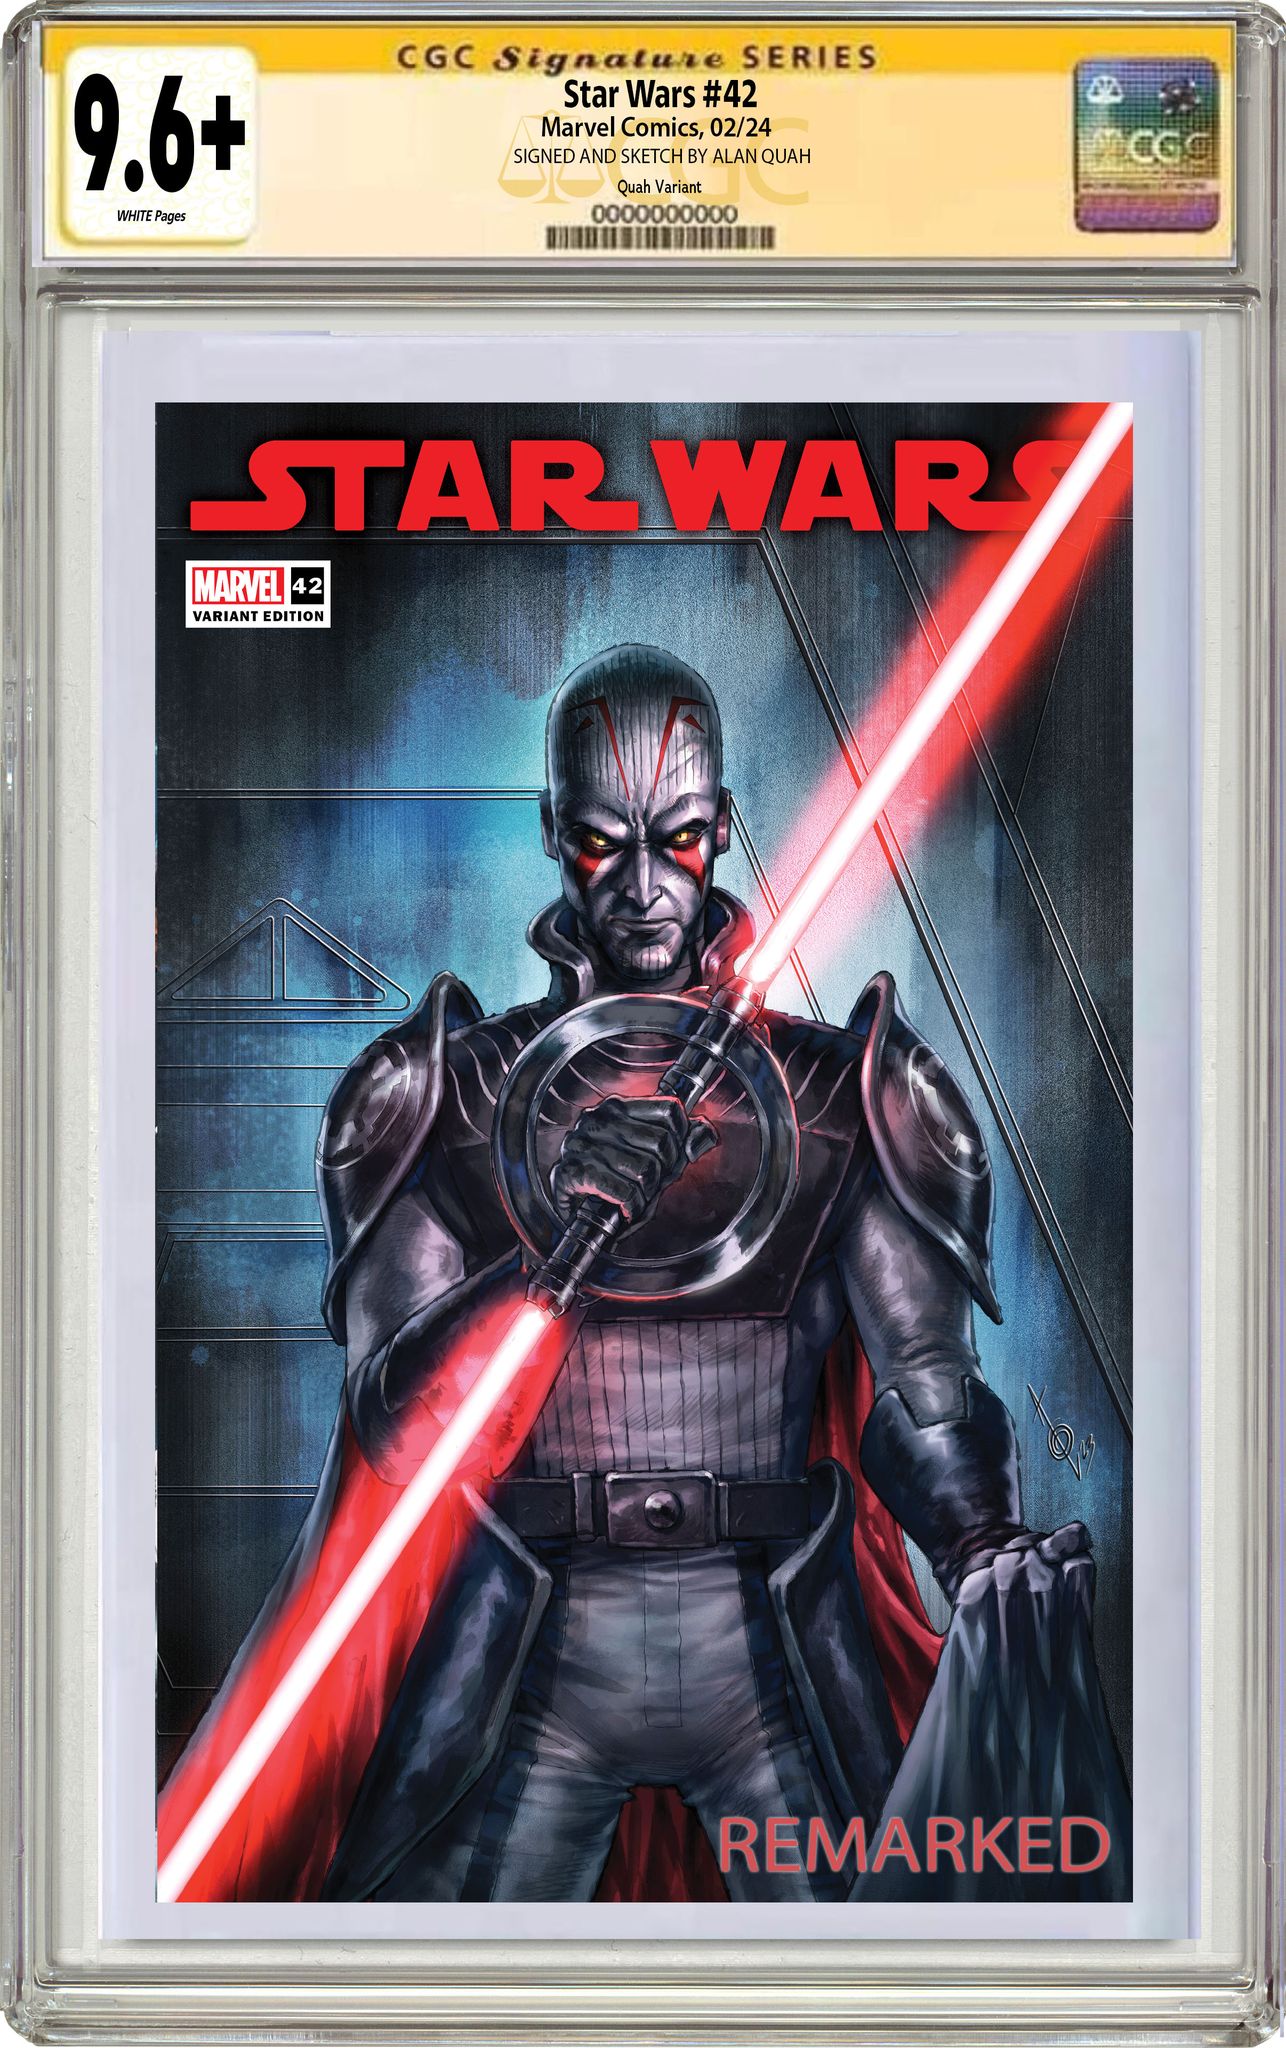 STAR WARS 42 ALAN QUAH REBELS 10TH ANNIVERSARY LIMITED EDITION #1 OF 4 EXCLUSIVE SERIES OPTIONS - 01/10/24 (M31)